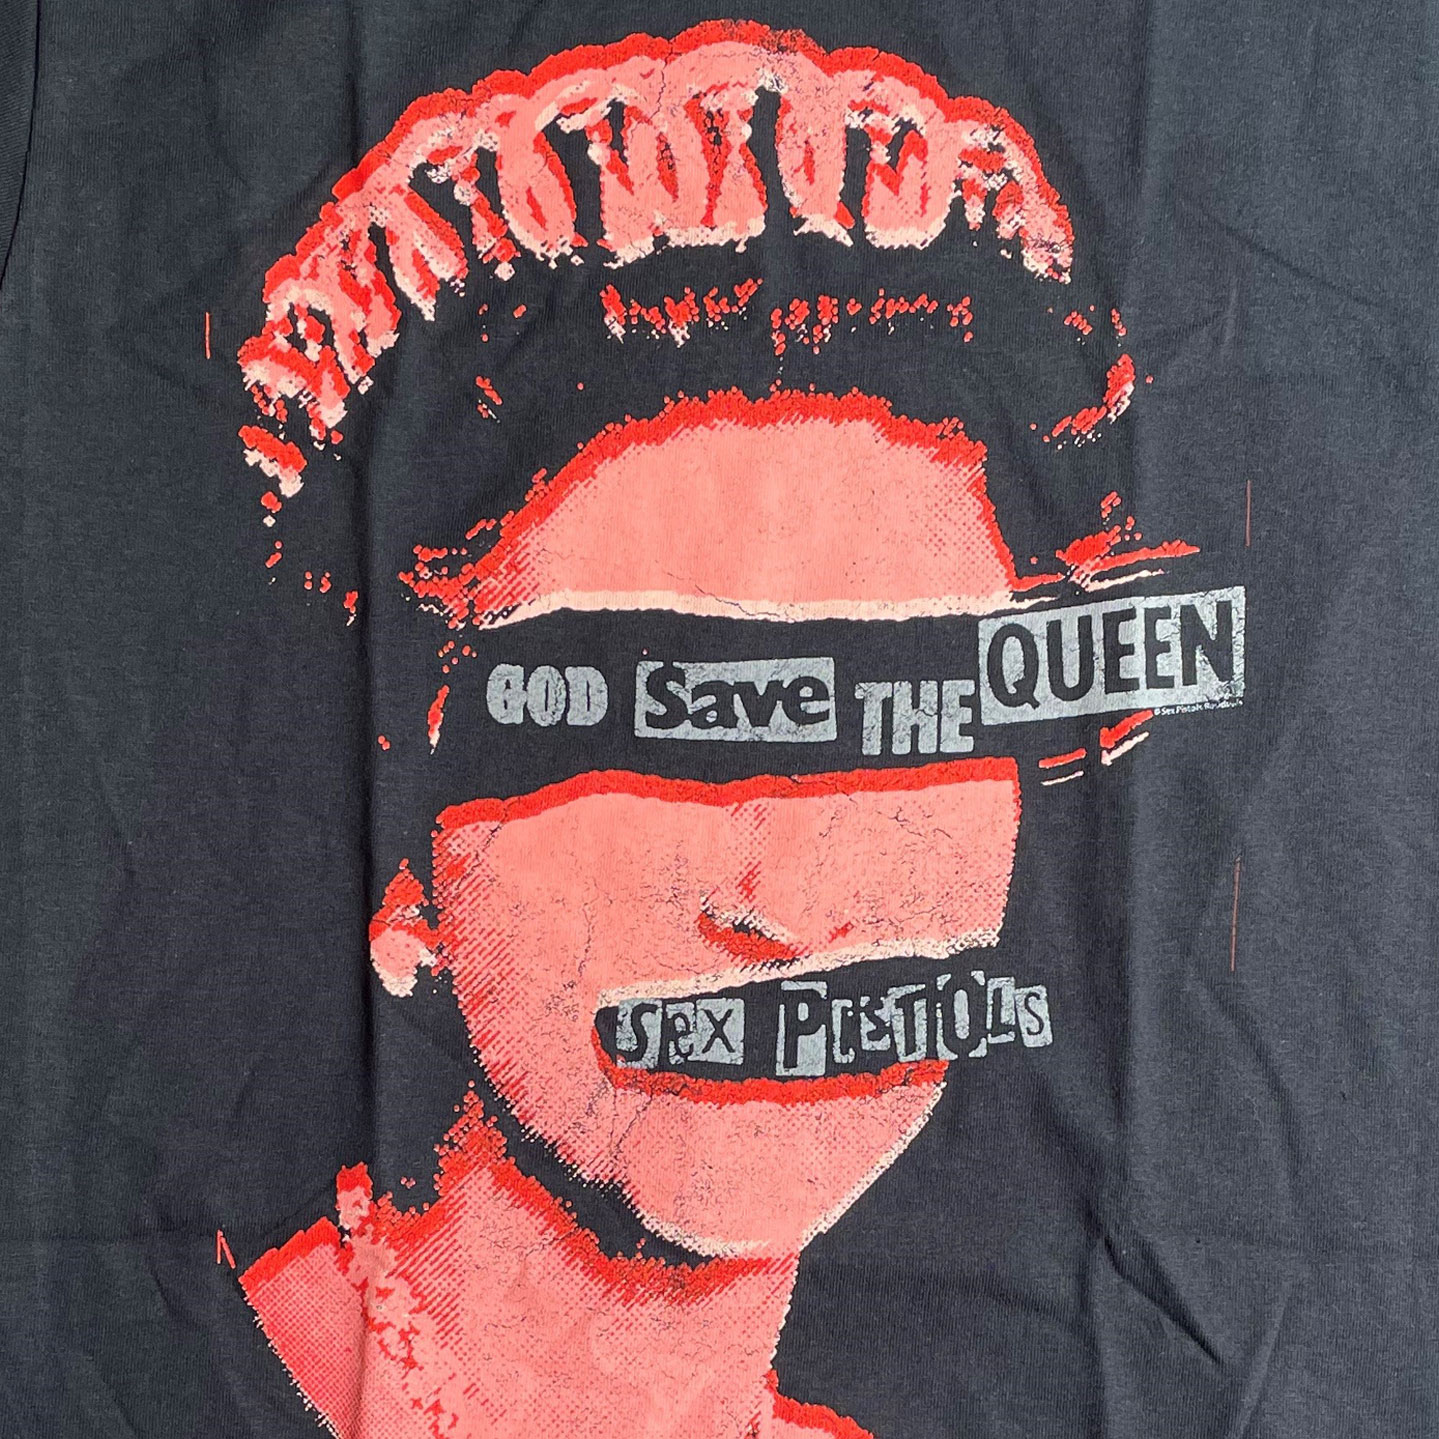 SEX PISTOLS Tシャツ GOD SAVE THE QUEEN